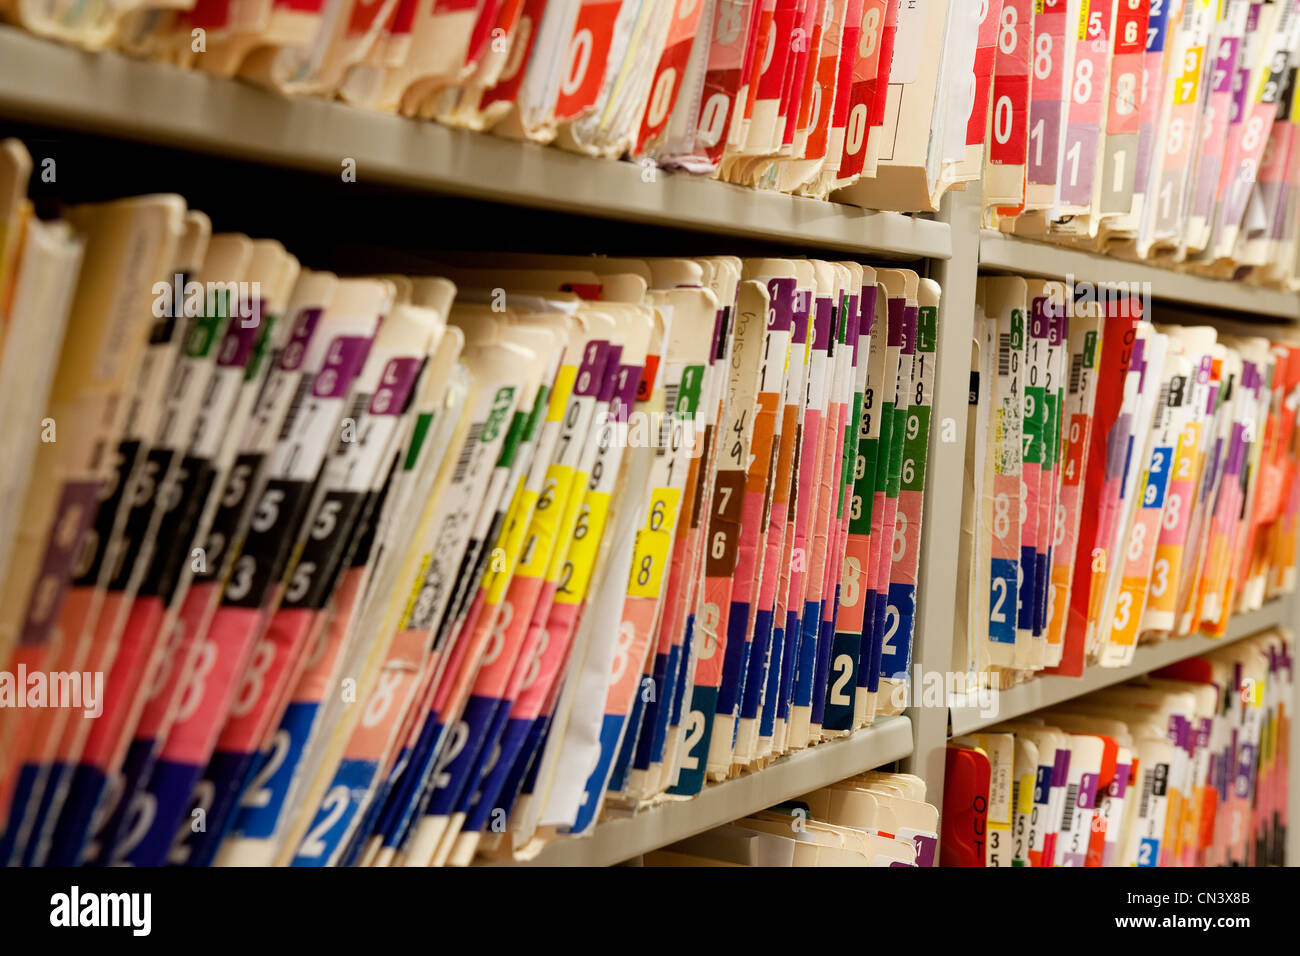 Rows of patients medical records Stock Photo